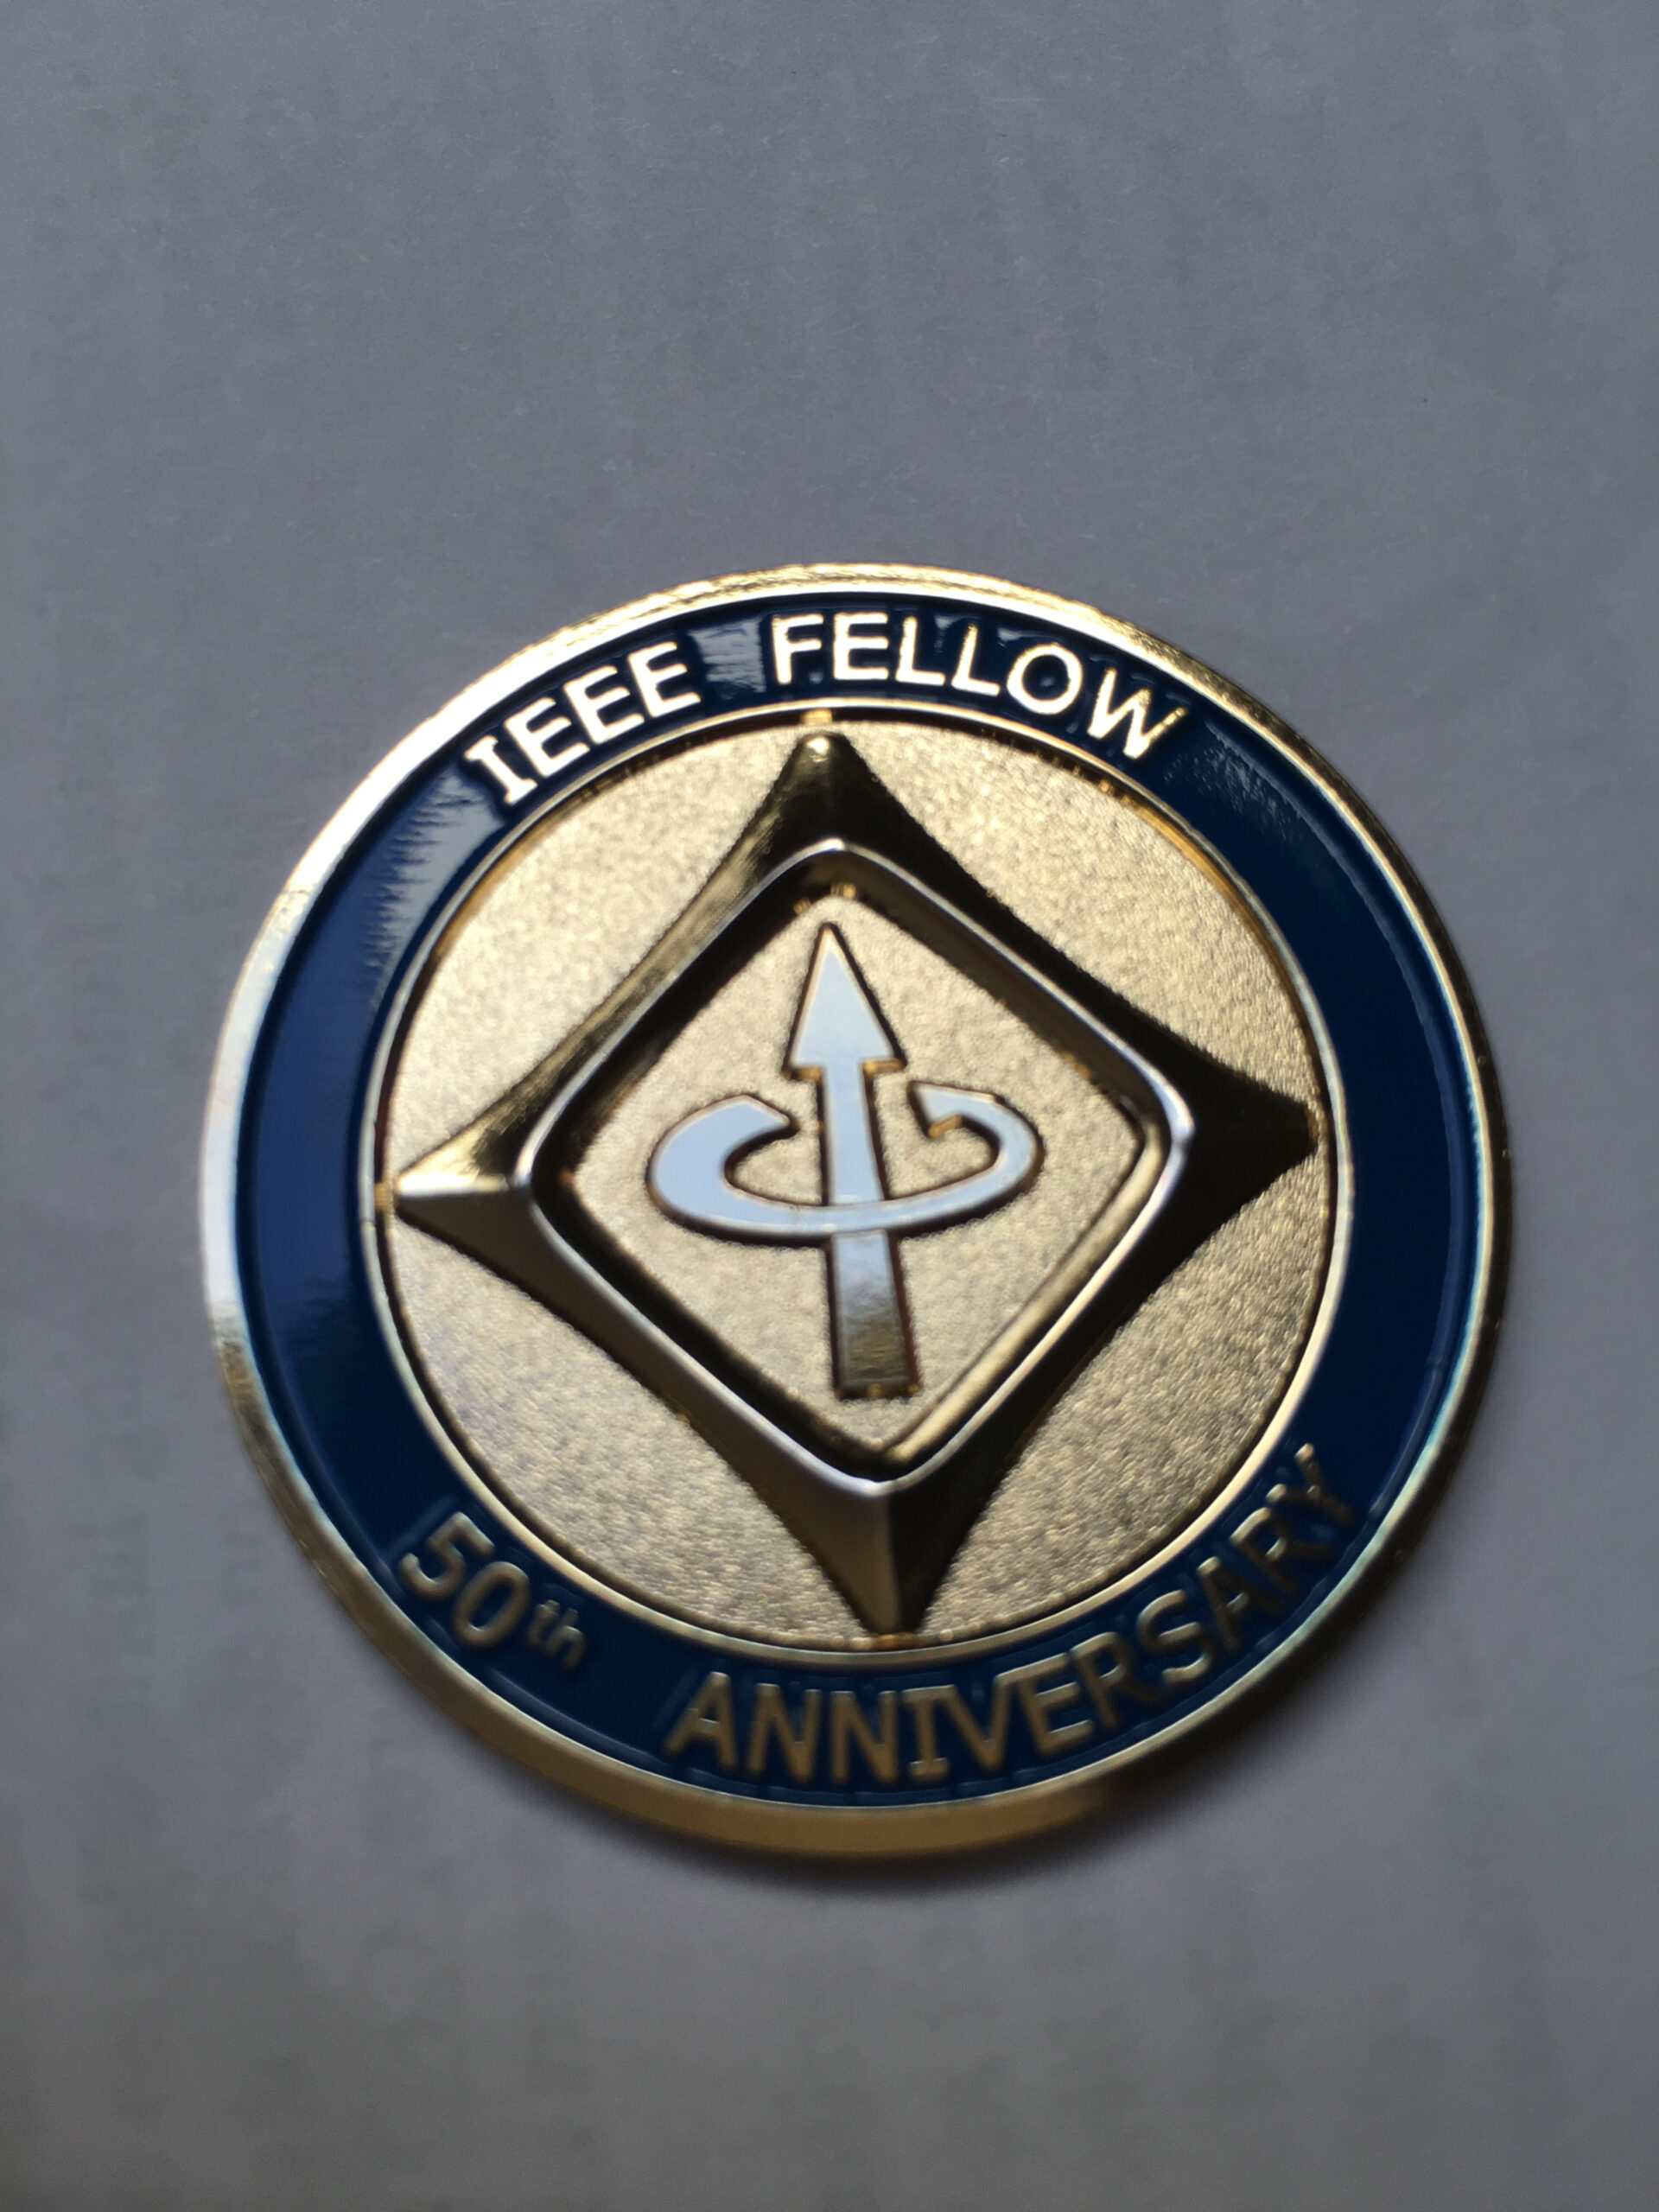 IEEE Fellow Coin – Given to recipients of Fellows elevation status